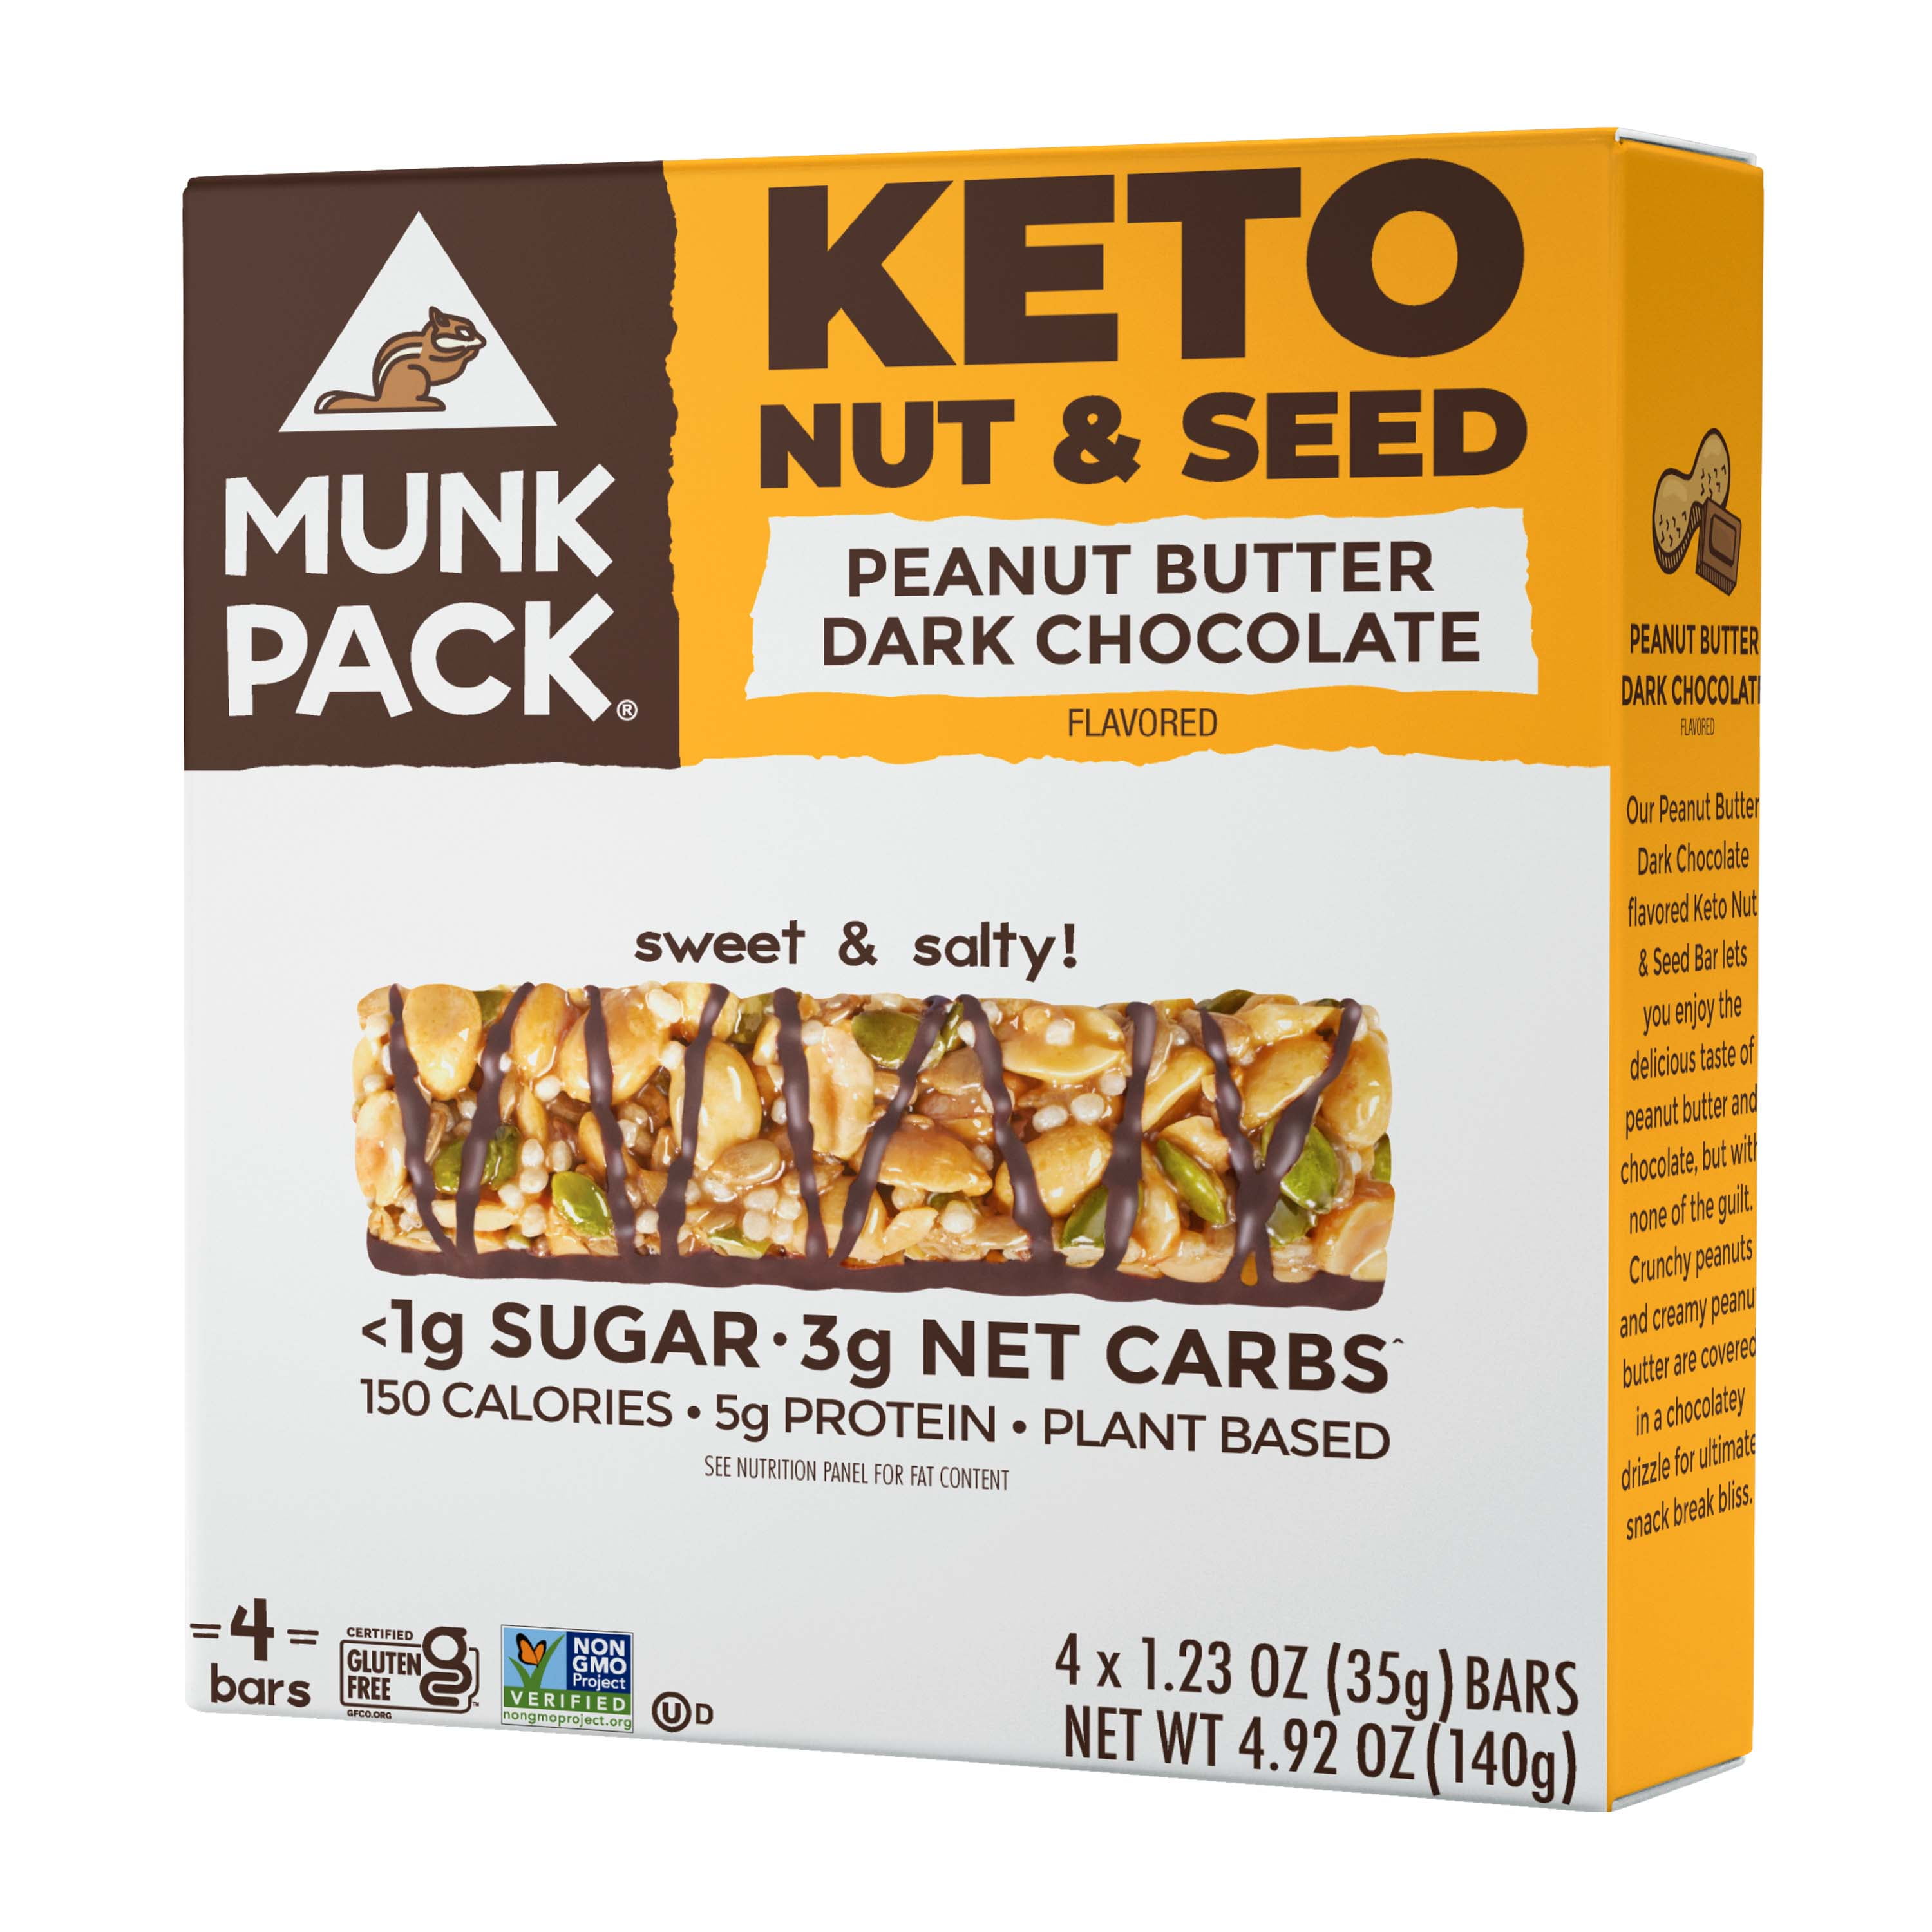 Munk Pack Keto Nut and Seed Bar, Peanut Butter Dark Chocolate, 4 ct.